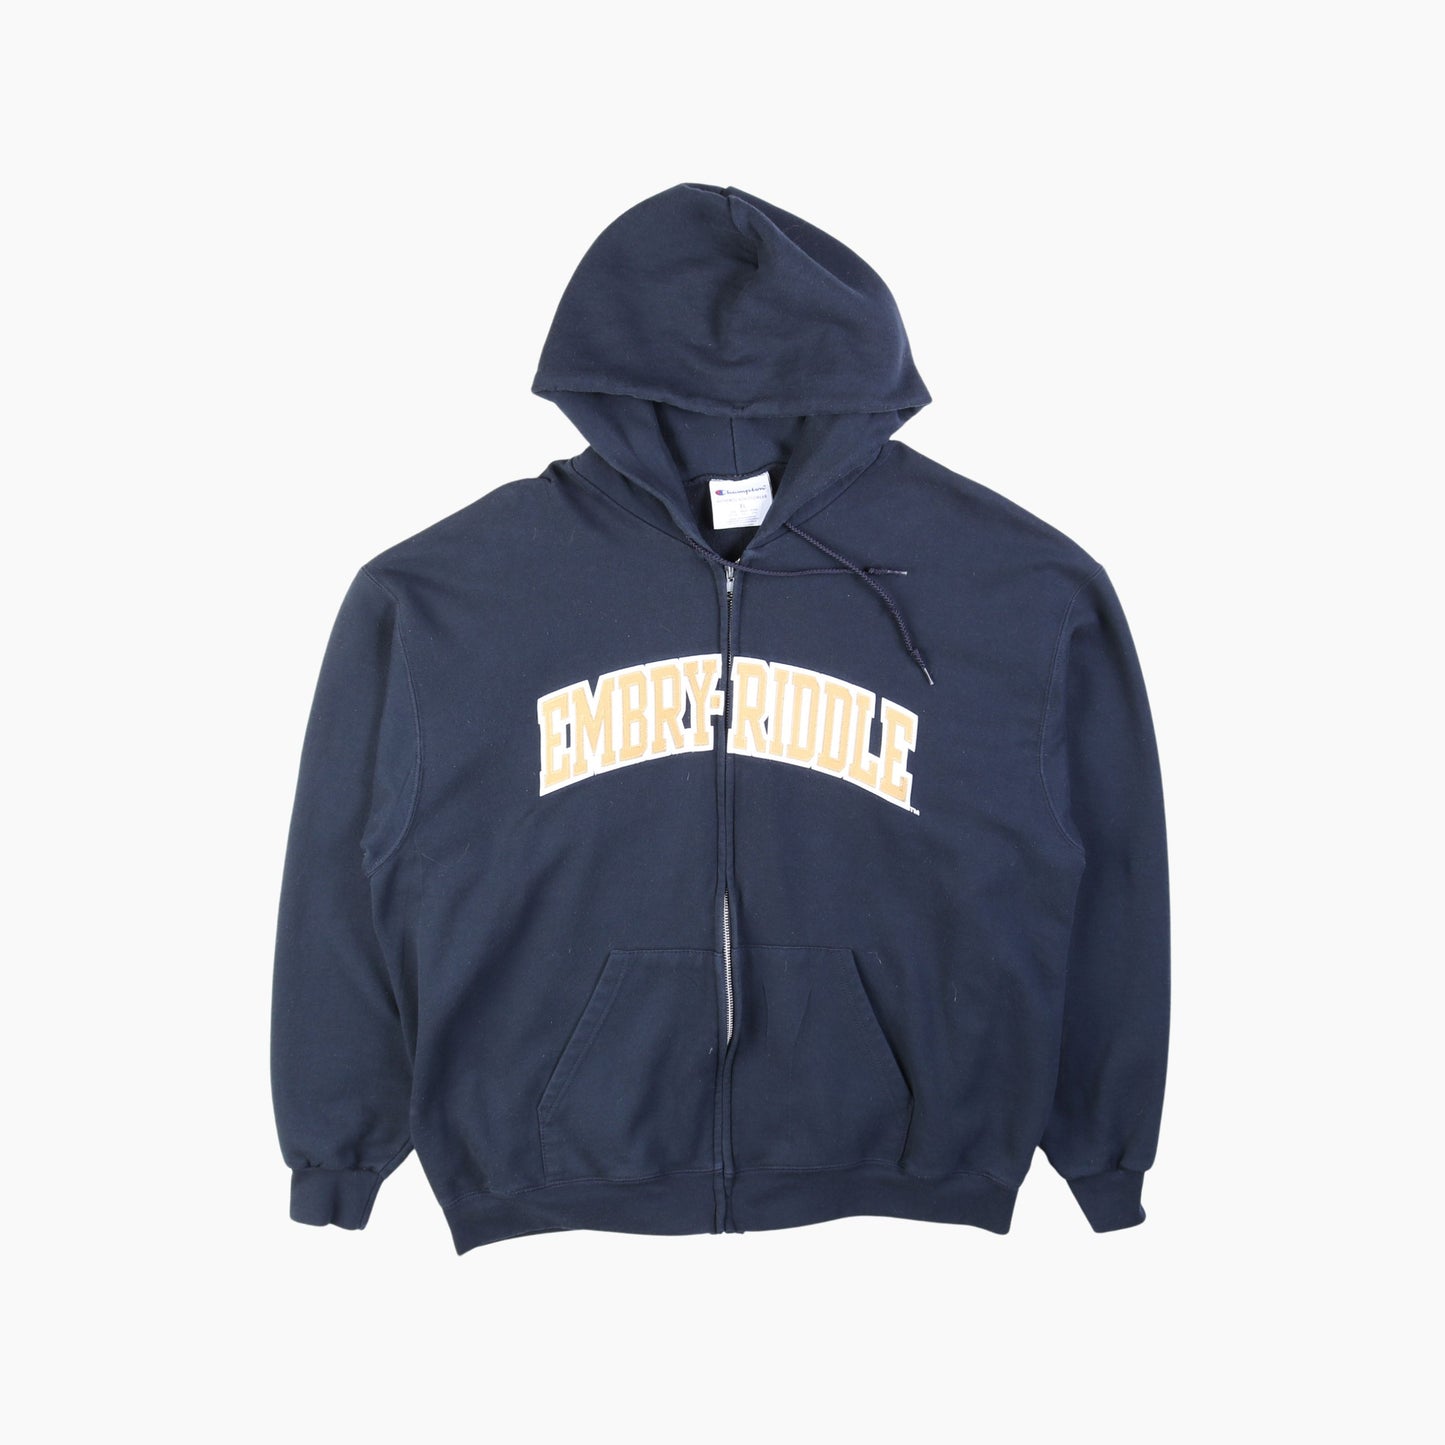 Vintage 'Embry-Riddle' Champion Hooded Sweatshirt - American Madness